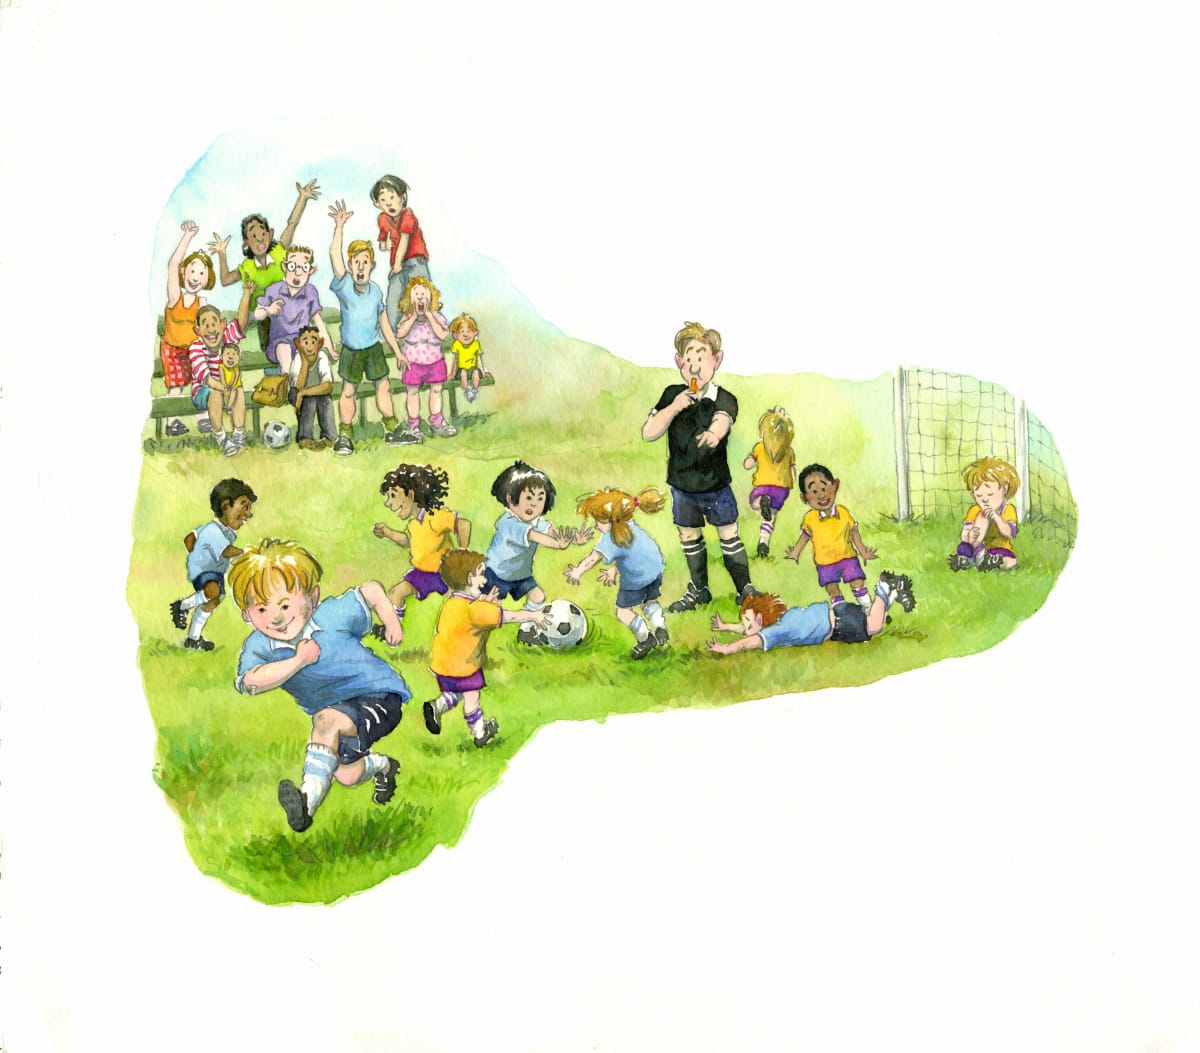 Four-year-old Soccer Game  Image: Illustration from Canadian Living magazine August 1999